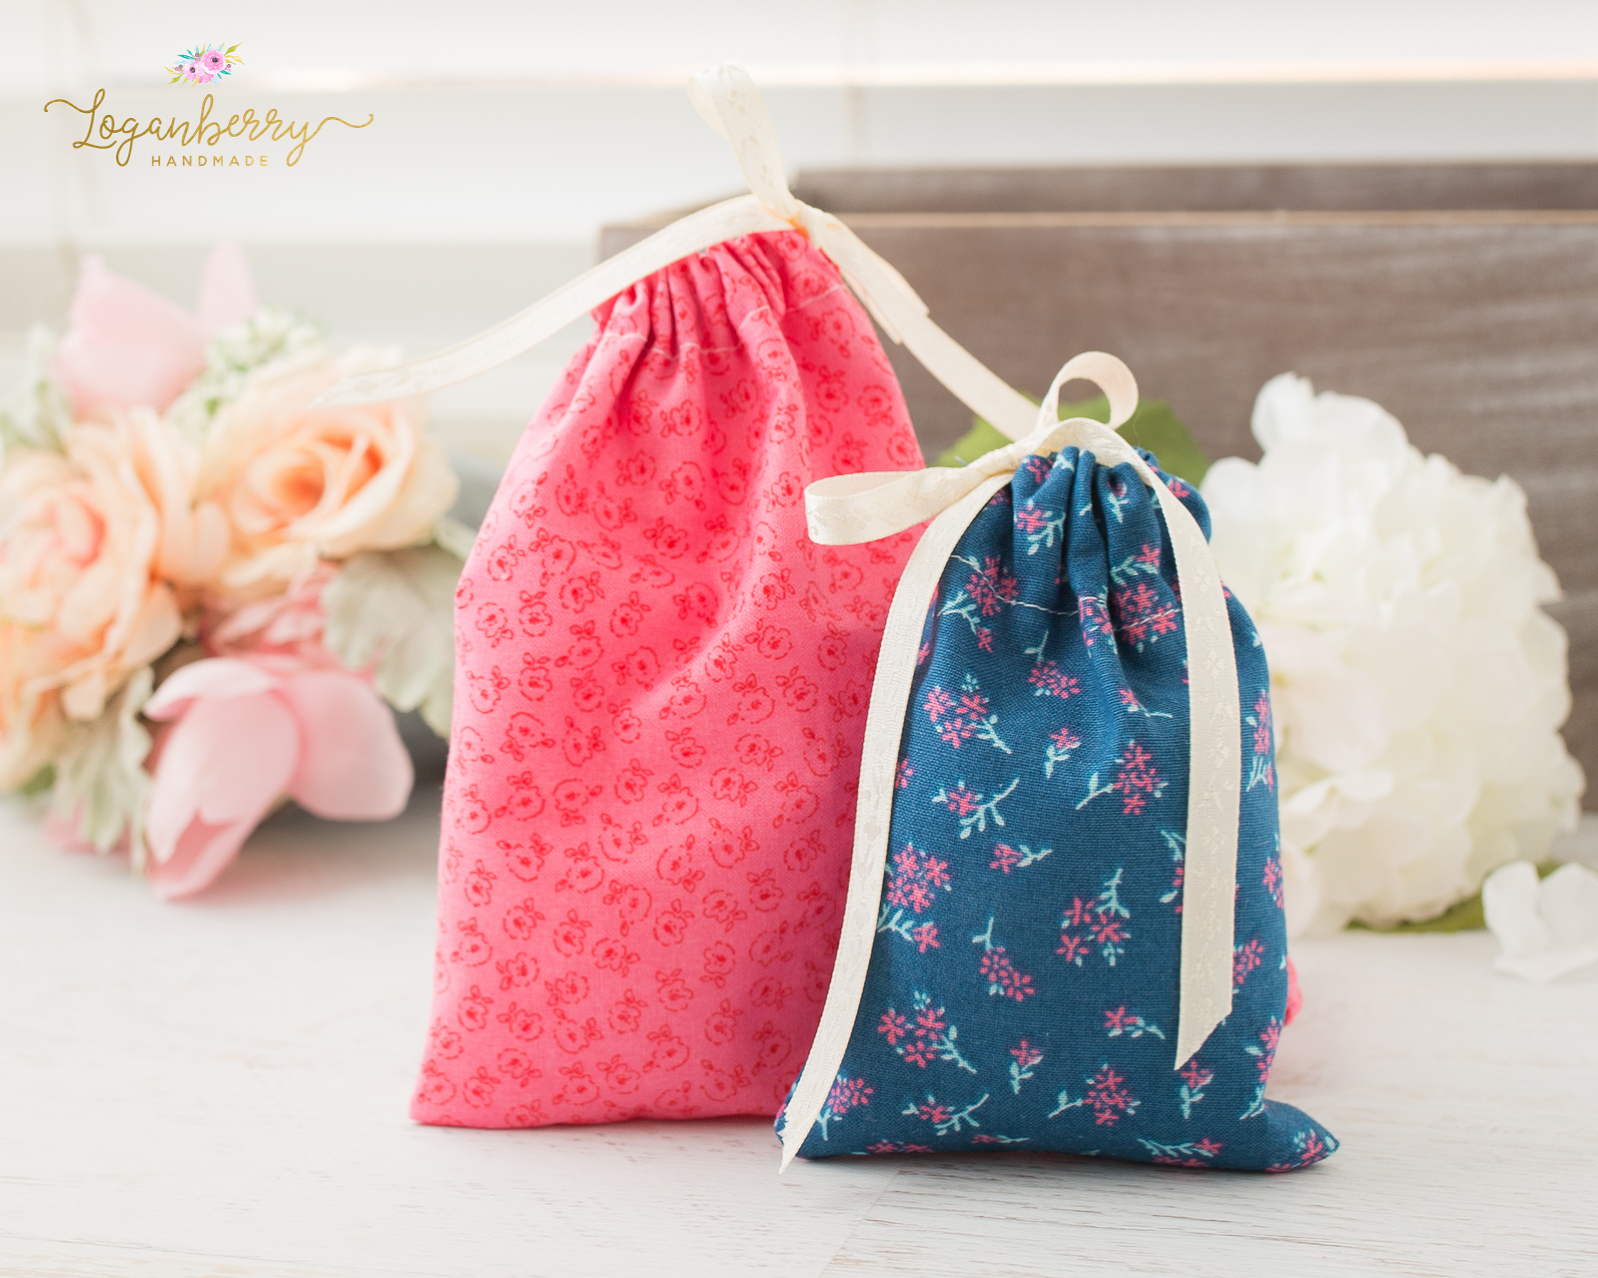 Diy Designer gift bags made in less than 5 min 